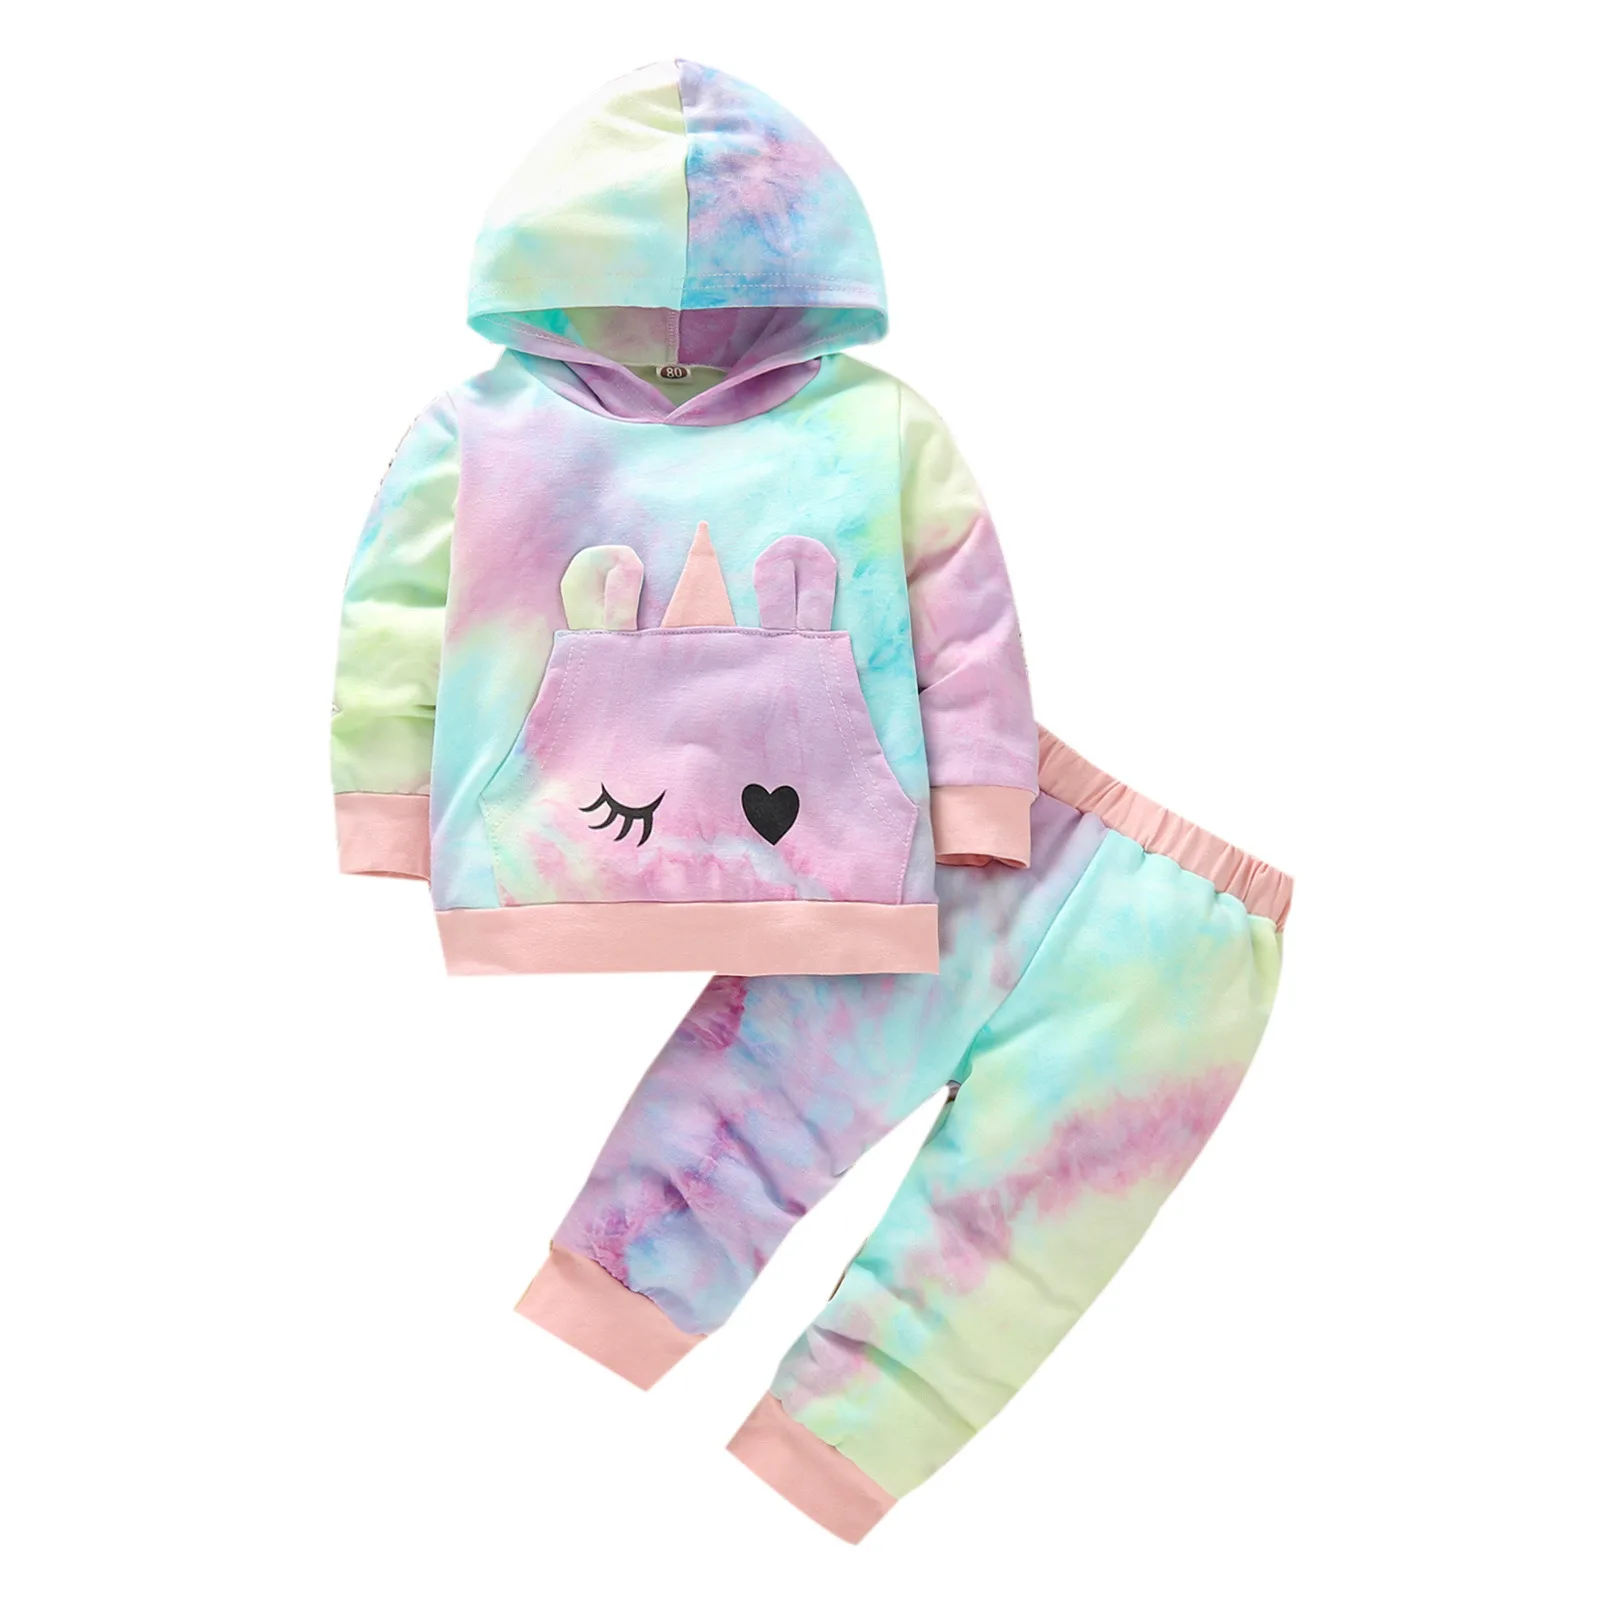 

Cute Toddler Baby Girls Clothes Set Unicorn Hoodies Sweatshirt Tie Dyed Print Infant Outfits Legging Pants Pocket Clothing Sets